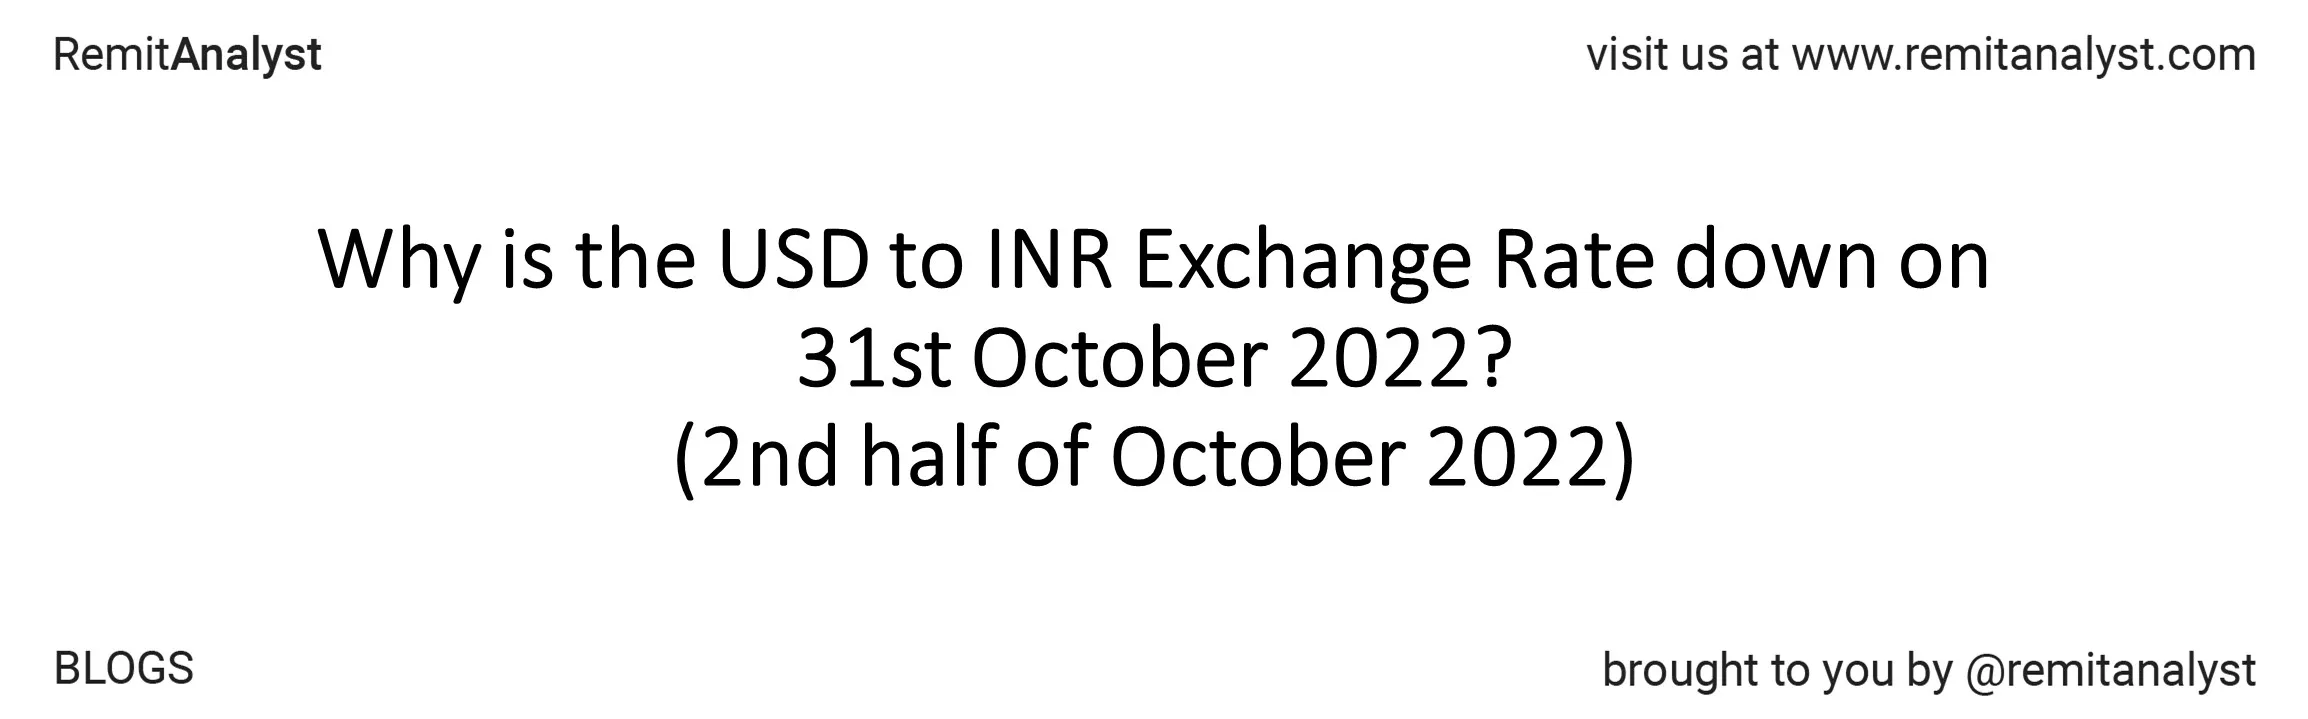 usd-to-inr-exchange-rate-16-oct-2022-to-31-oct-2022-title